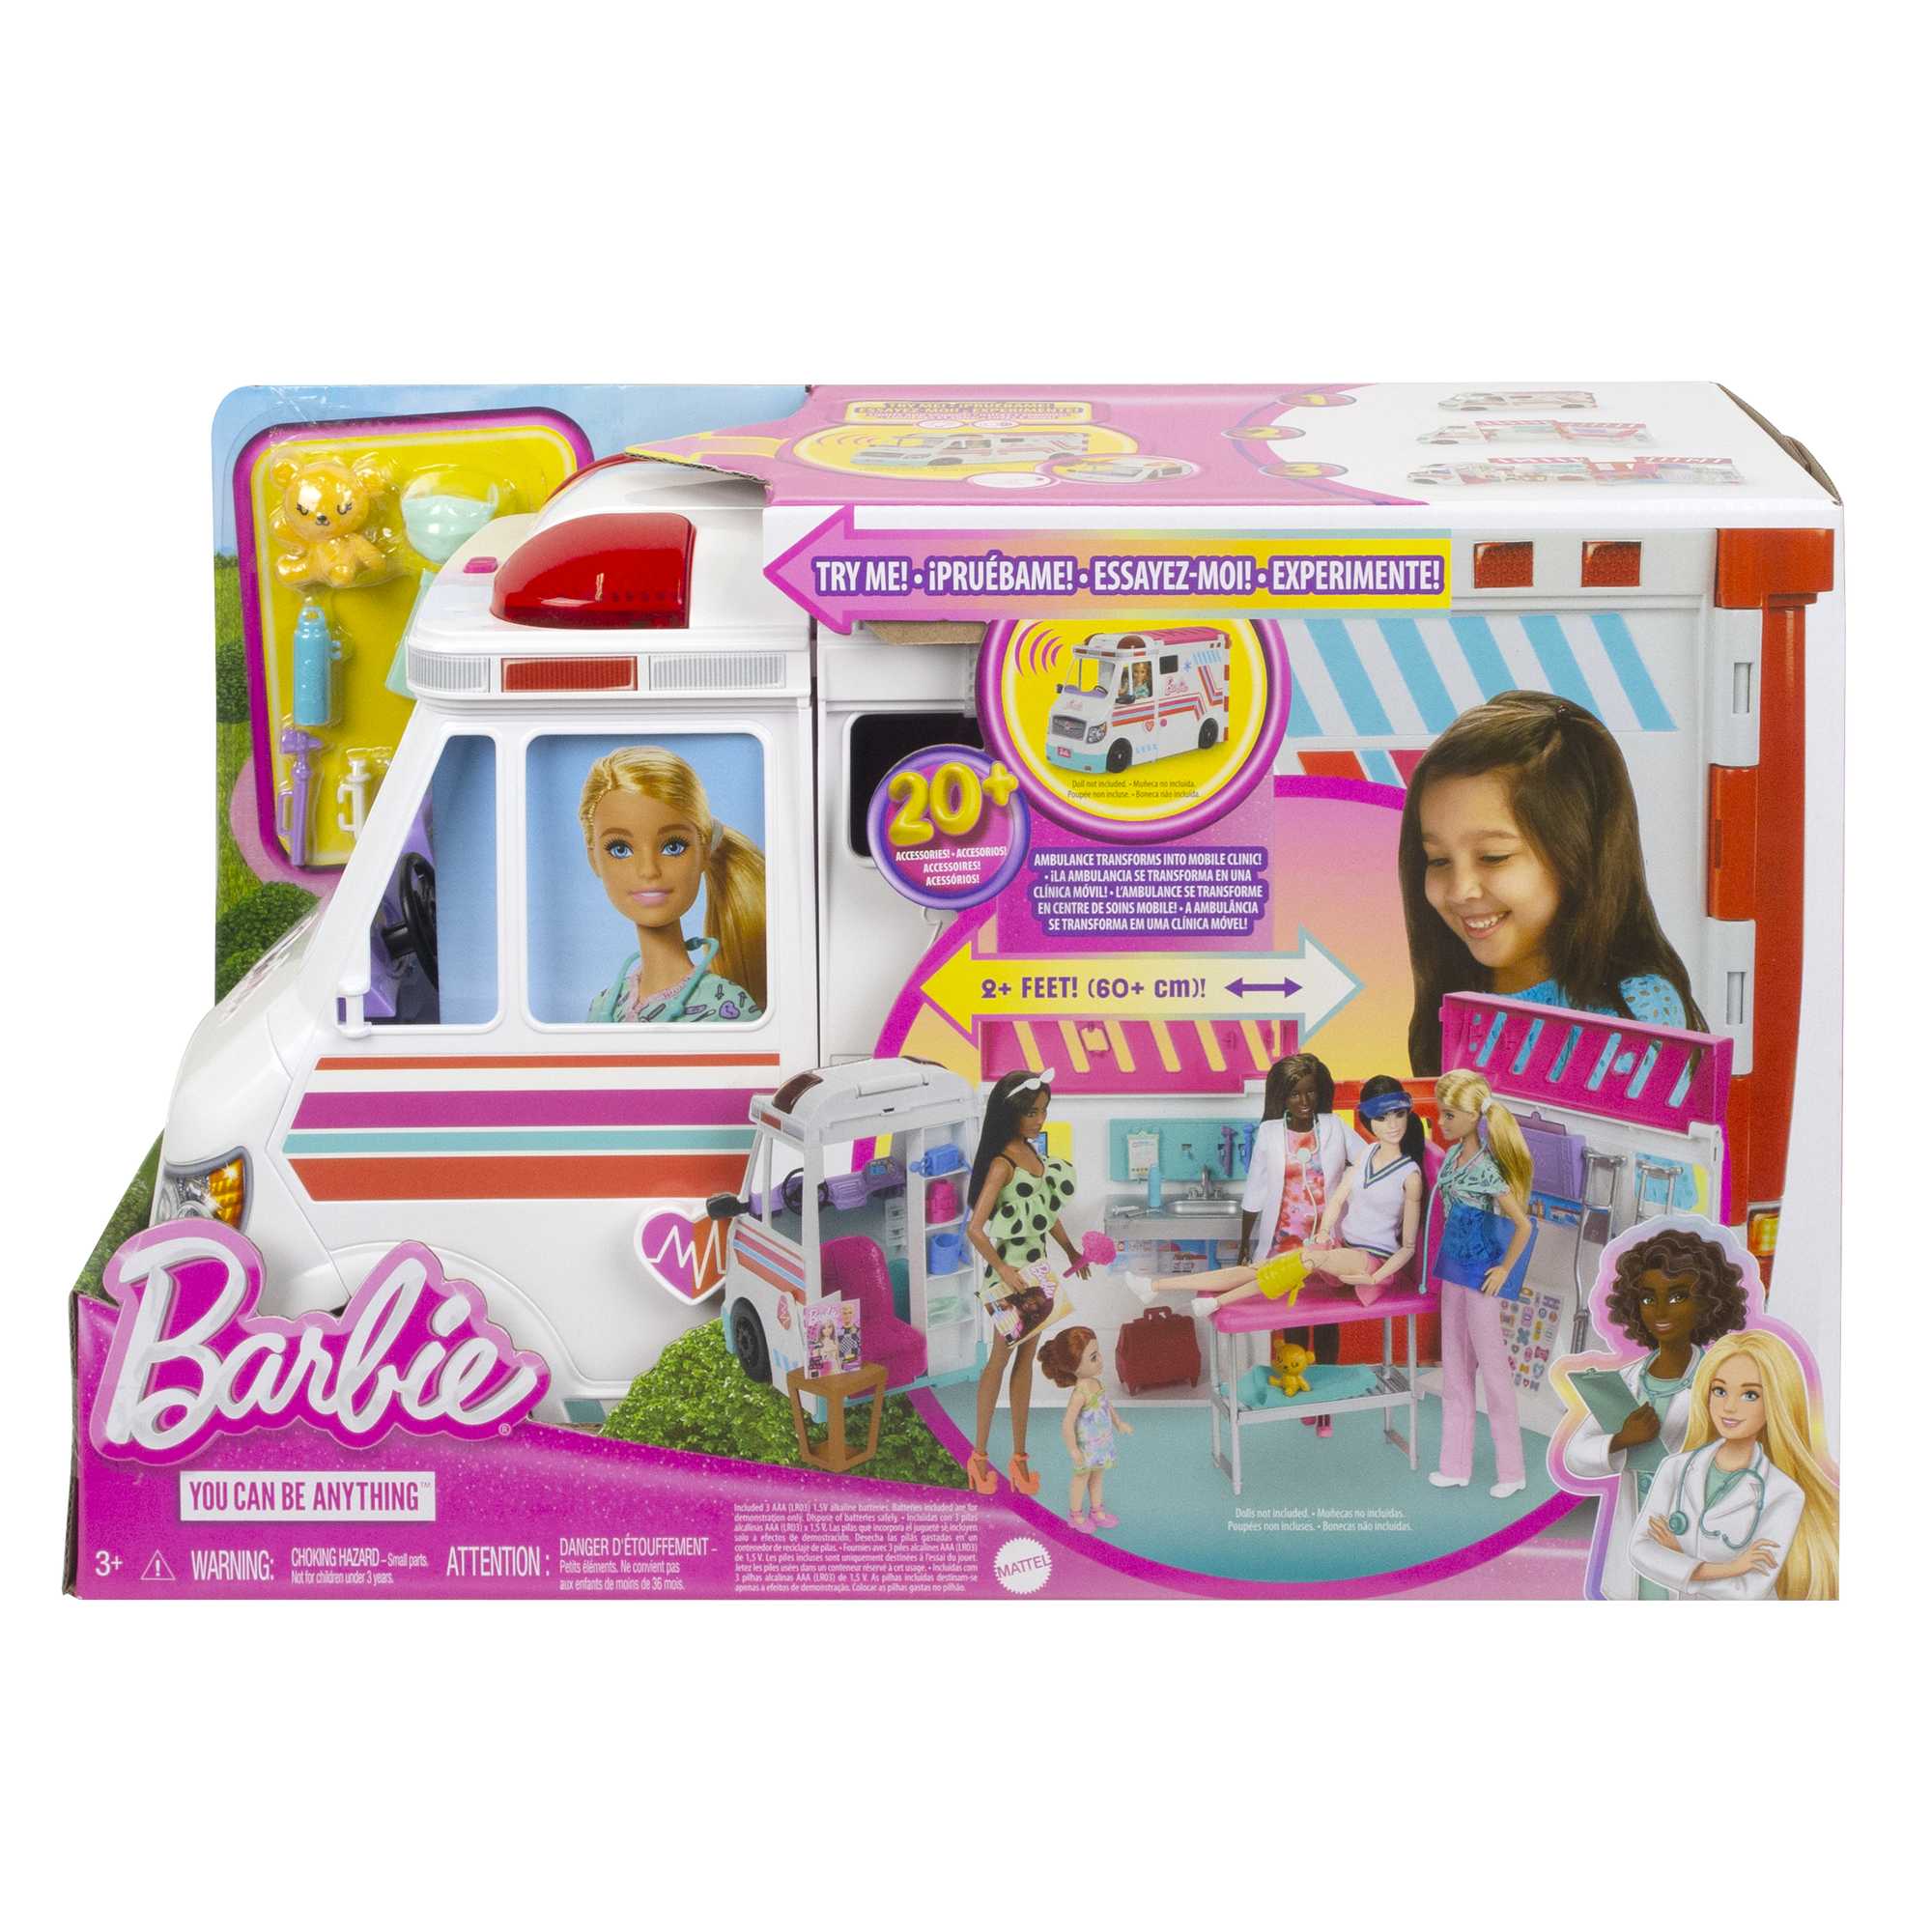 Barbie Toys, Transforming And Clinic Playset, 20+ Care Clinic | HKT79 MATTEL